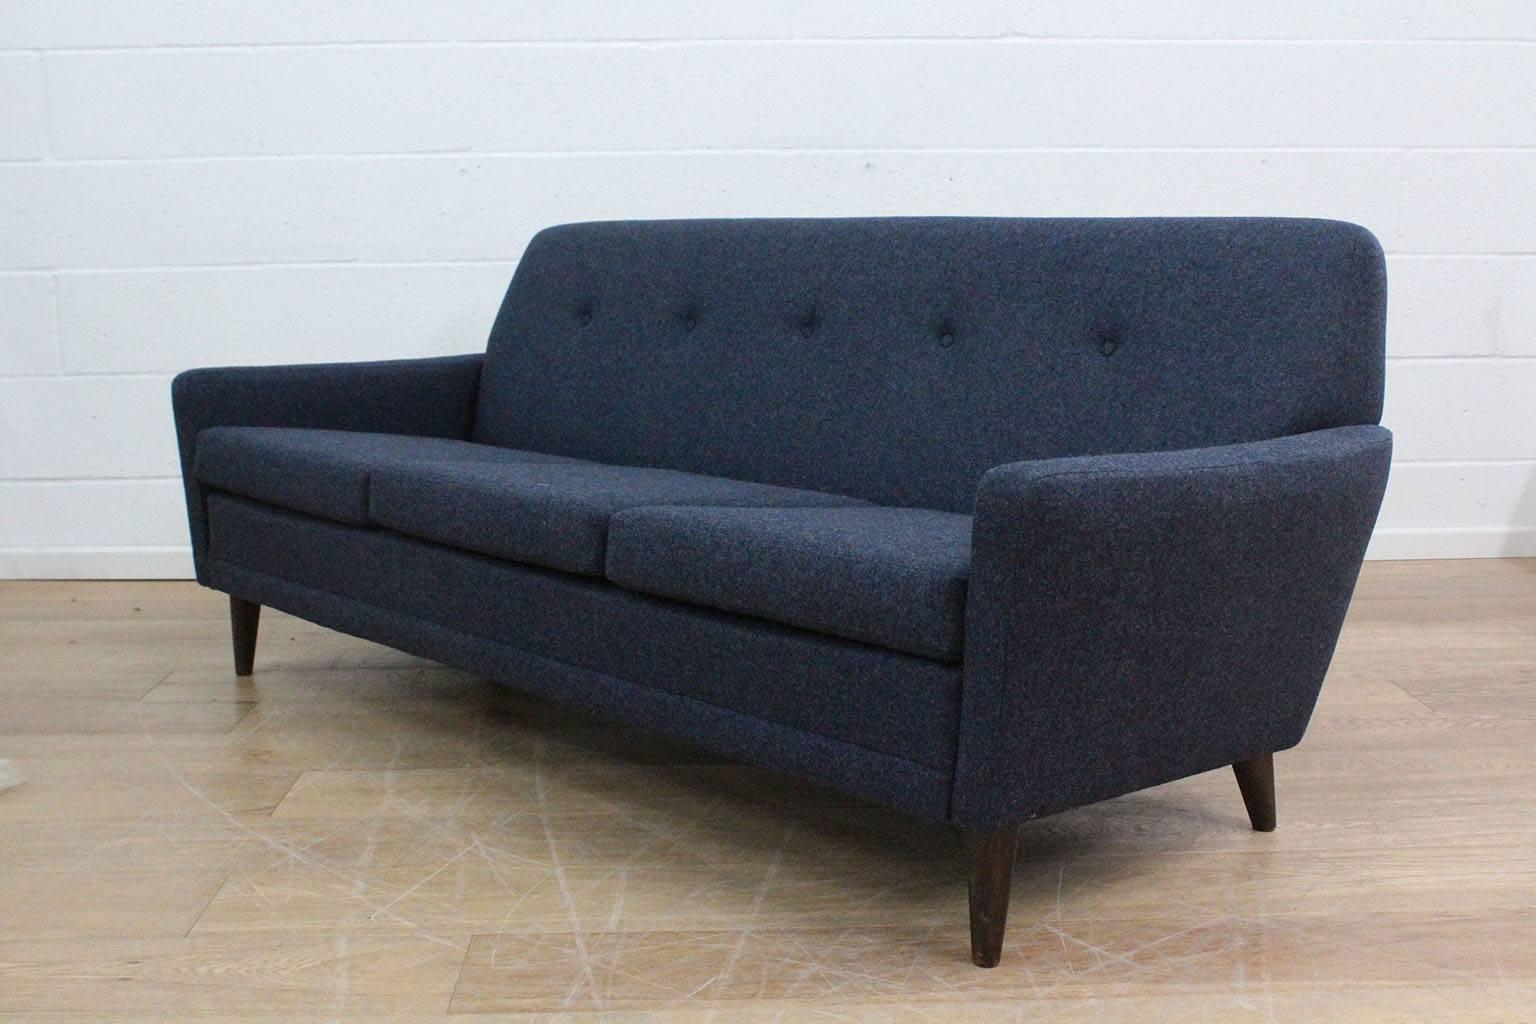 These midcentury DUX-made sofas never disappoint. Clean, simple styling combined with superb comfort make these ideal family couches. The inky blue wool used on Vergil brings this Classic into the 21st century. It’s ready for another 50 years of